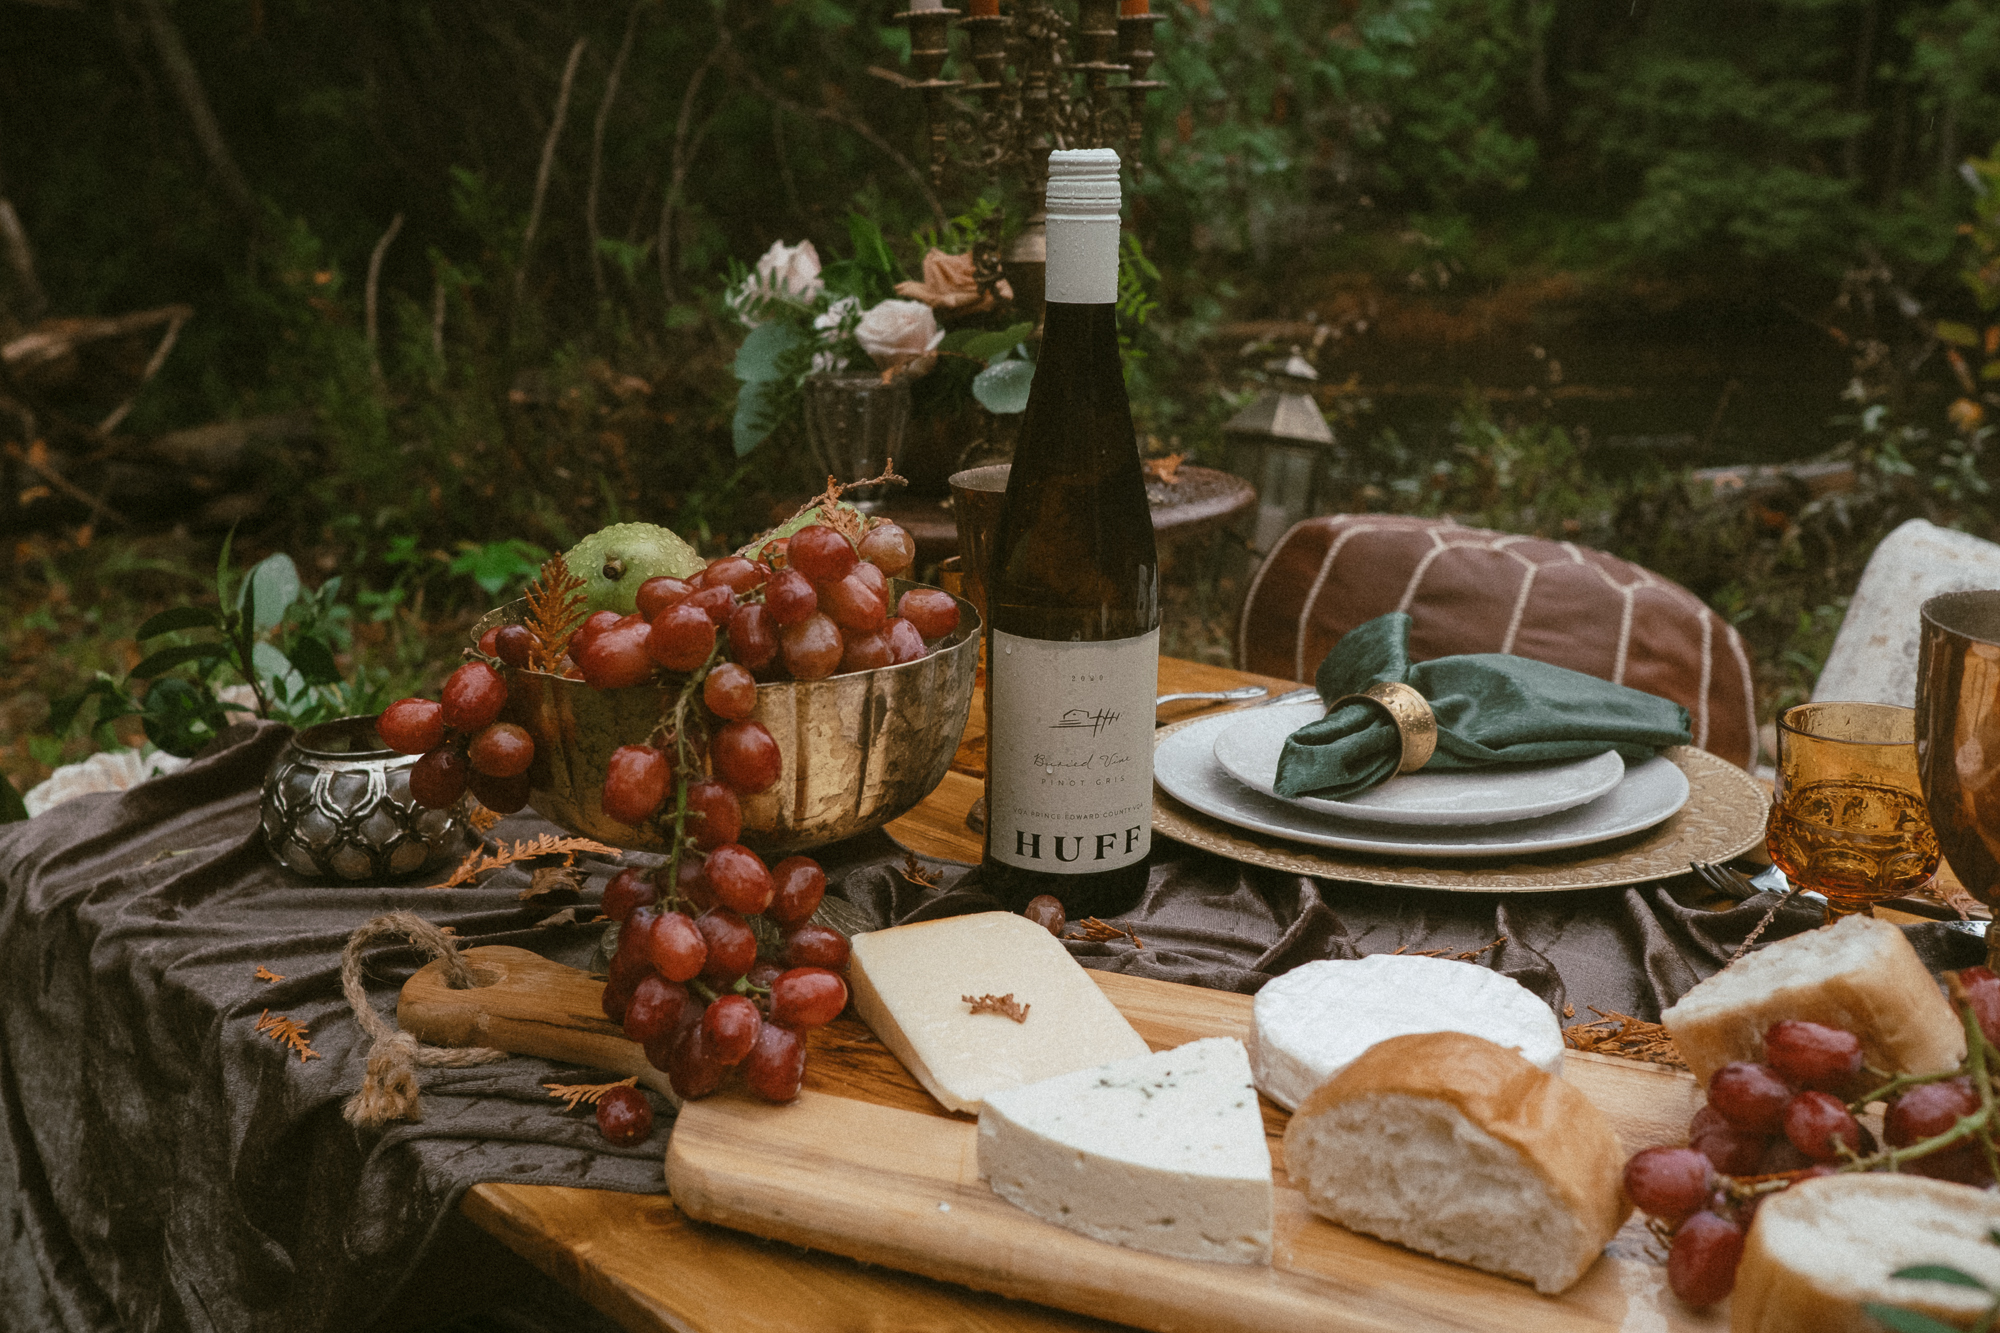 Game of Thrones-inspired tablescape with grapes and wine